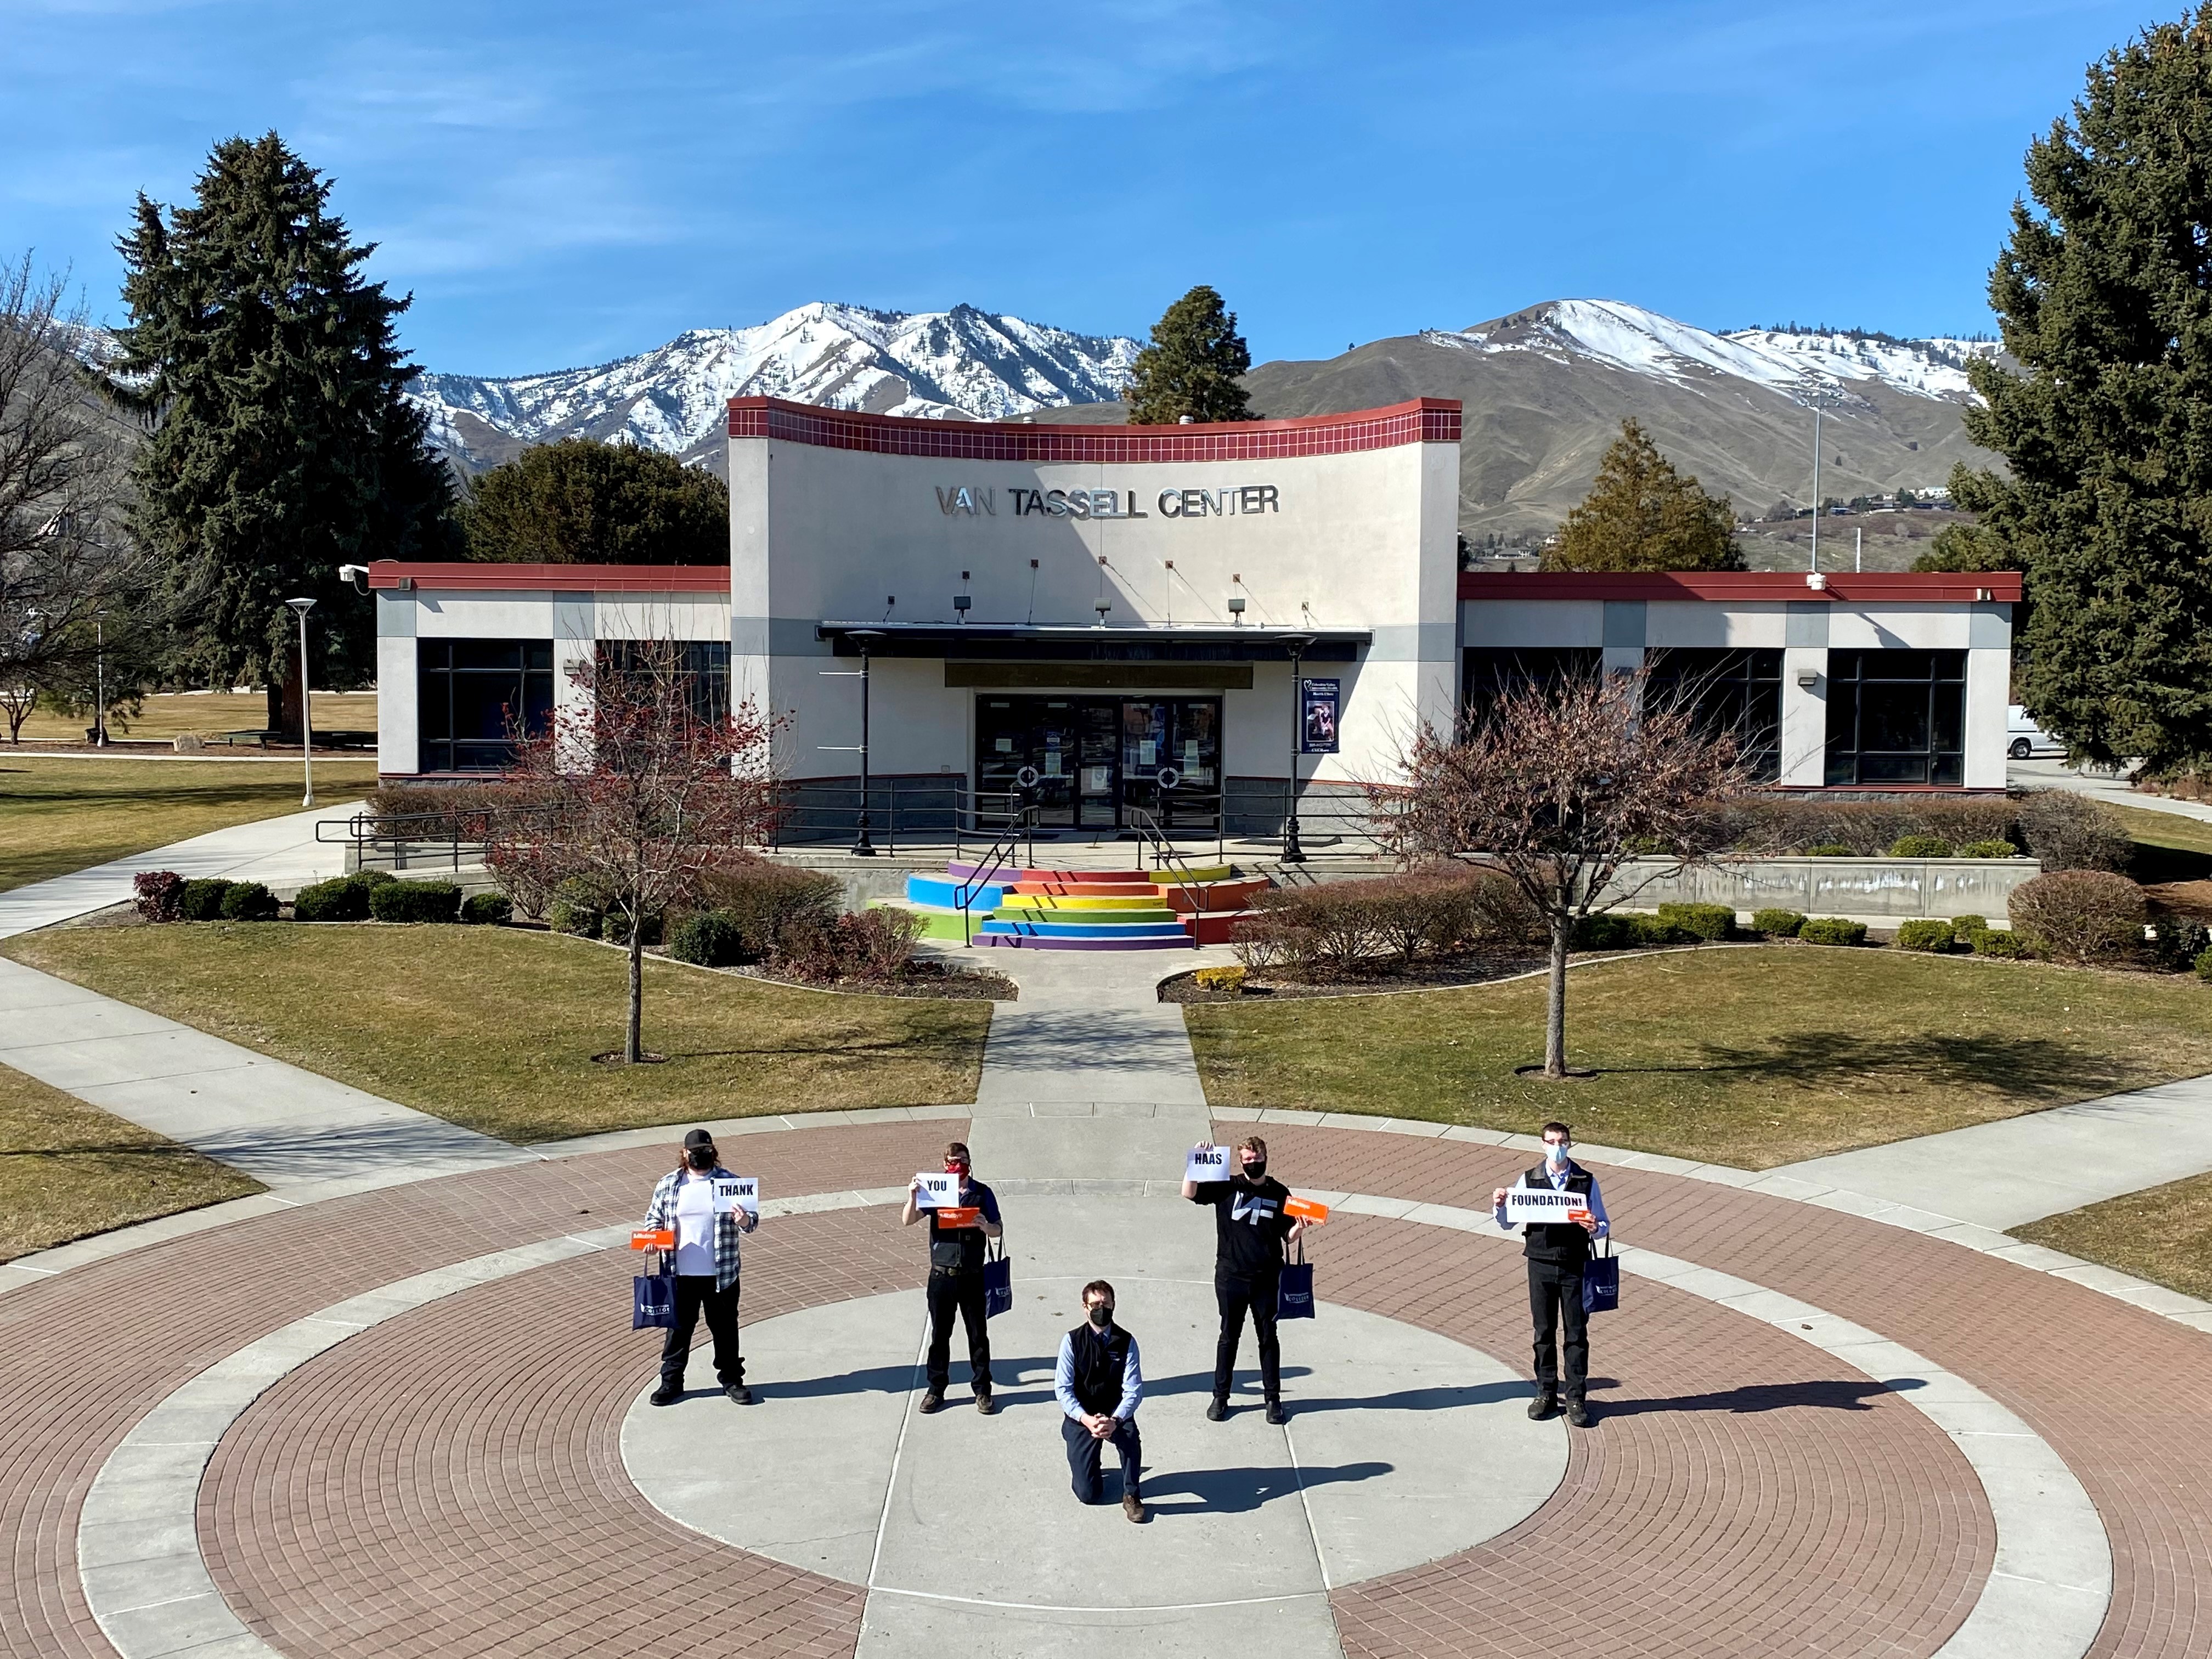 Machining students posing with tools in front of the Van Tassell Center building on the Wenatchee campus